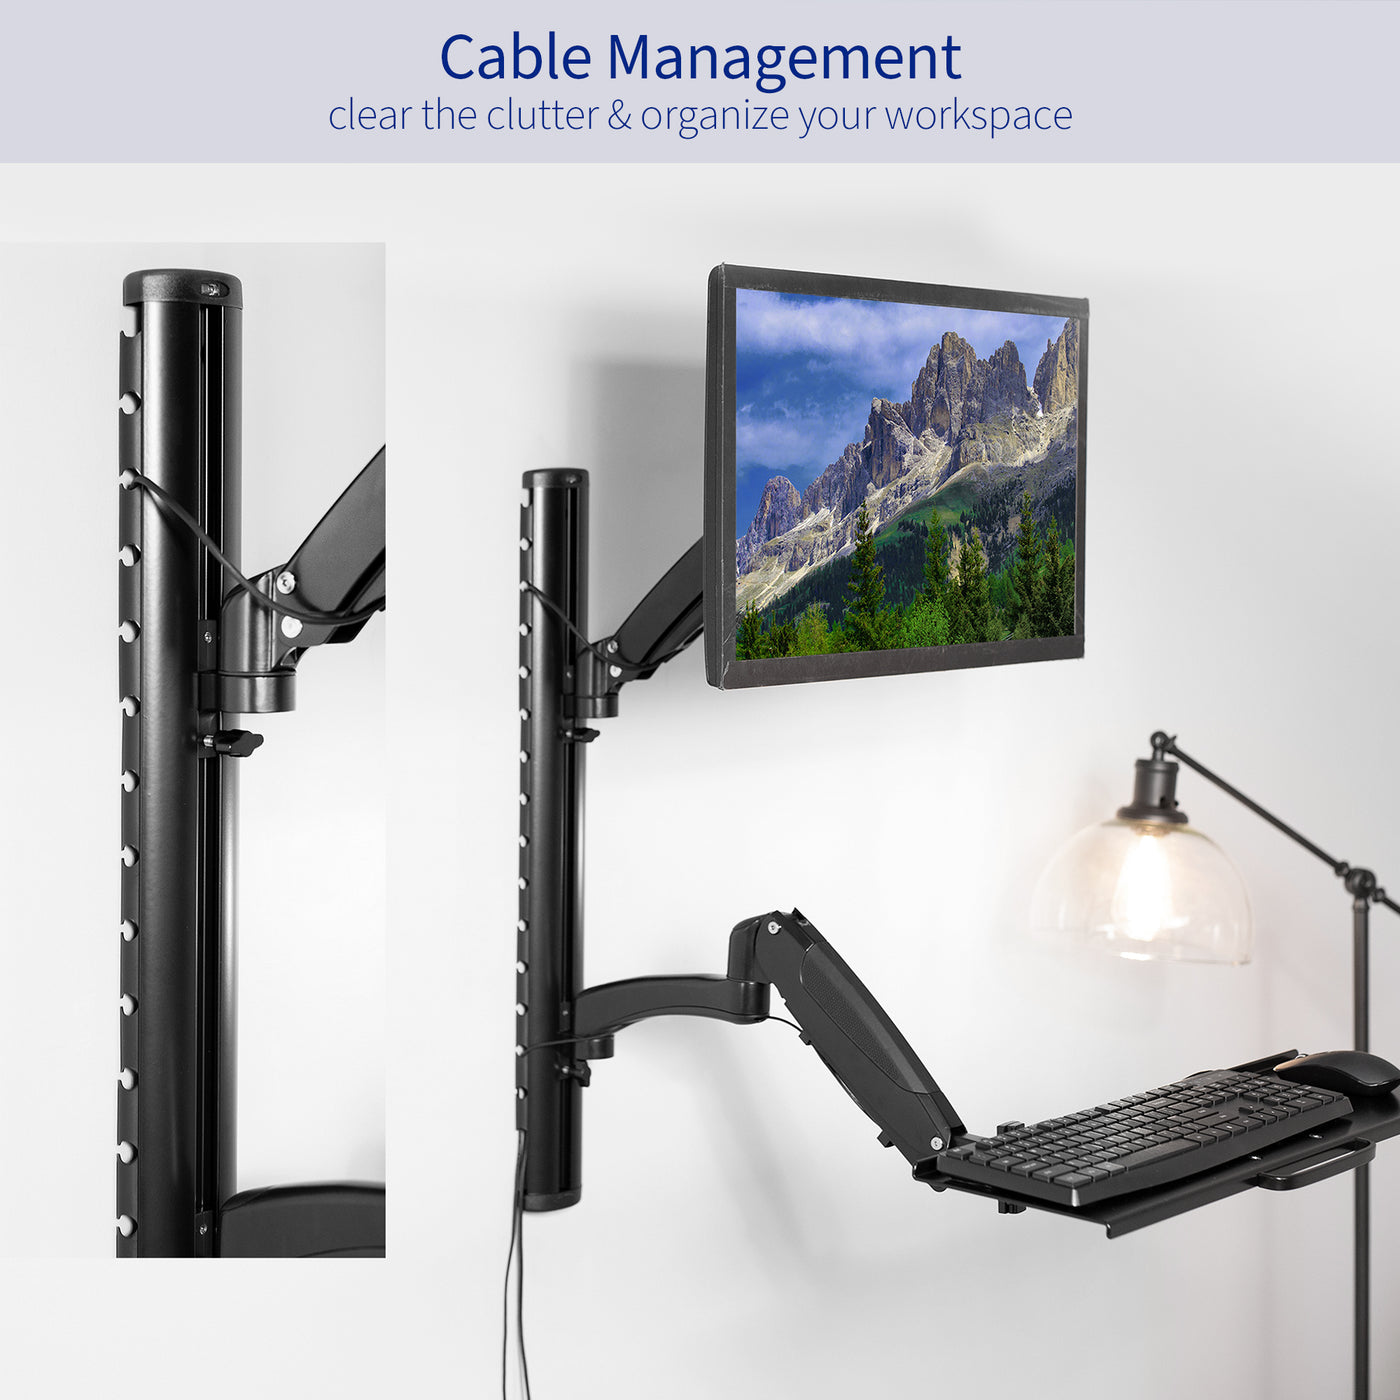 Incorporated cable management to maintain a clean workspace.